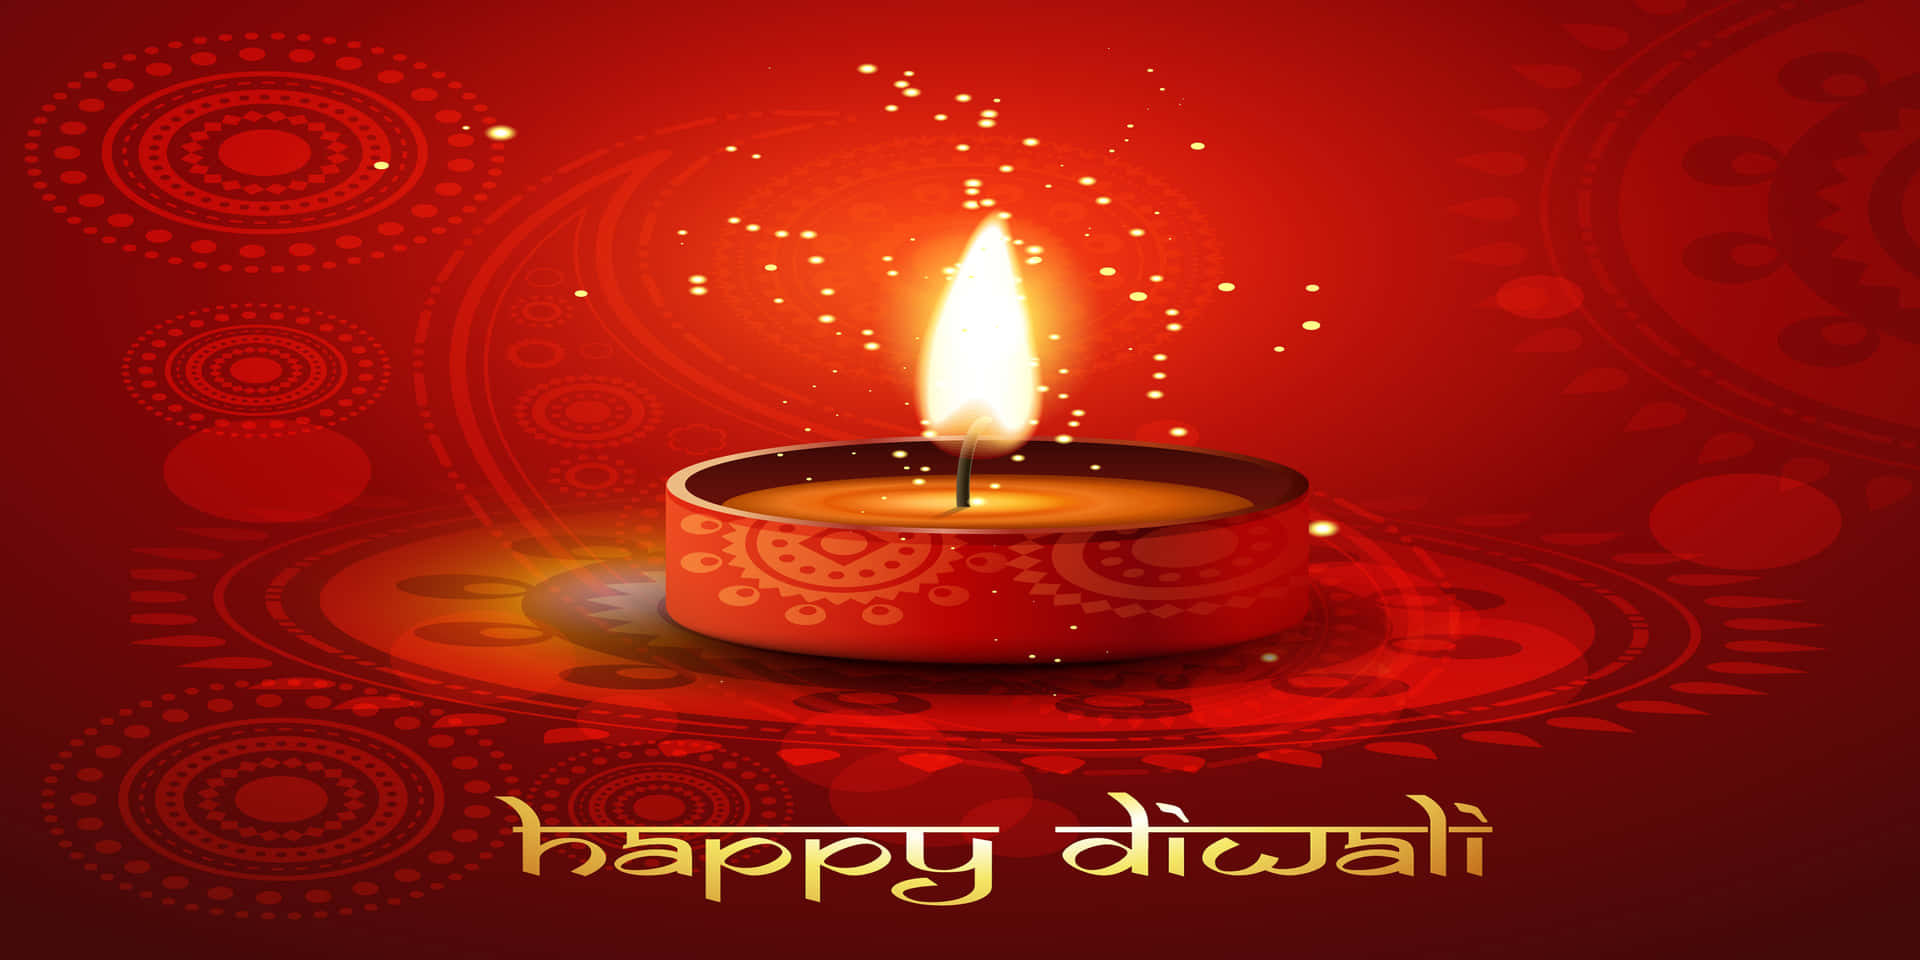 Happy Diwali Greeting Card With A Candle